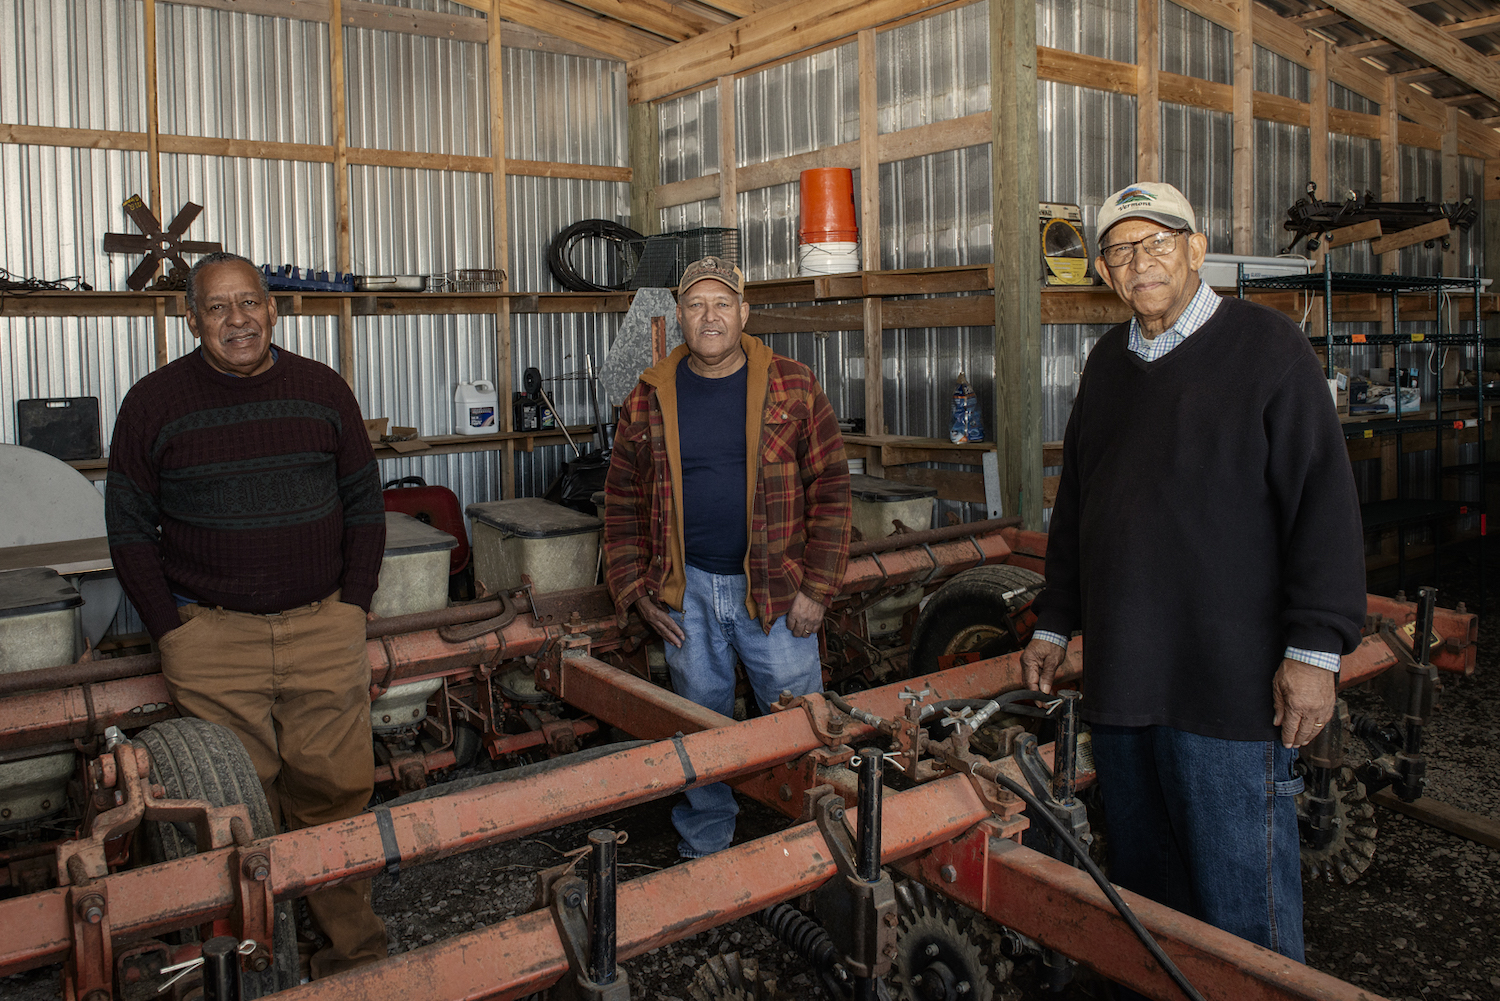 From left to right: The Wright brothers, John, Herbert and Lloyd, stand by a large planter housed in the barn with other farming equipment.